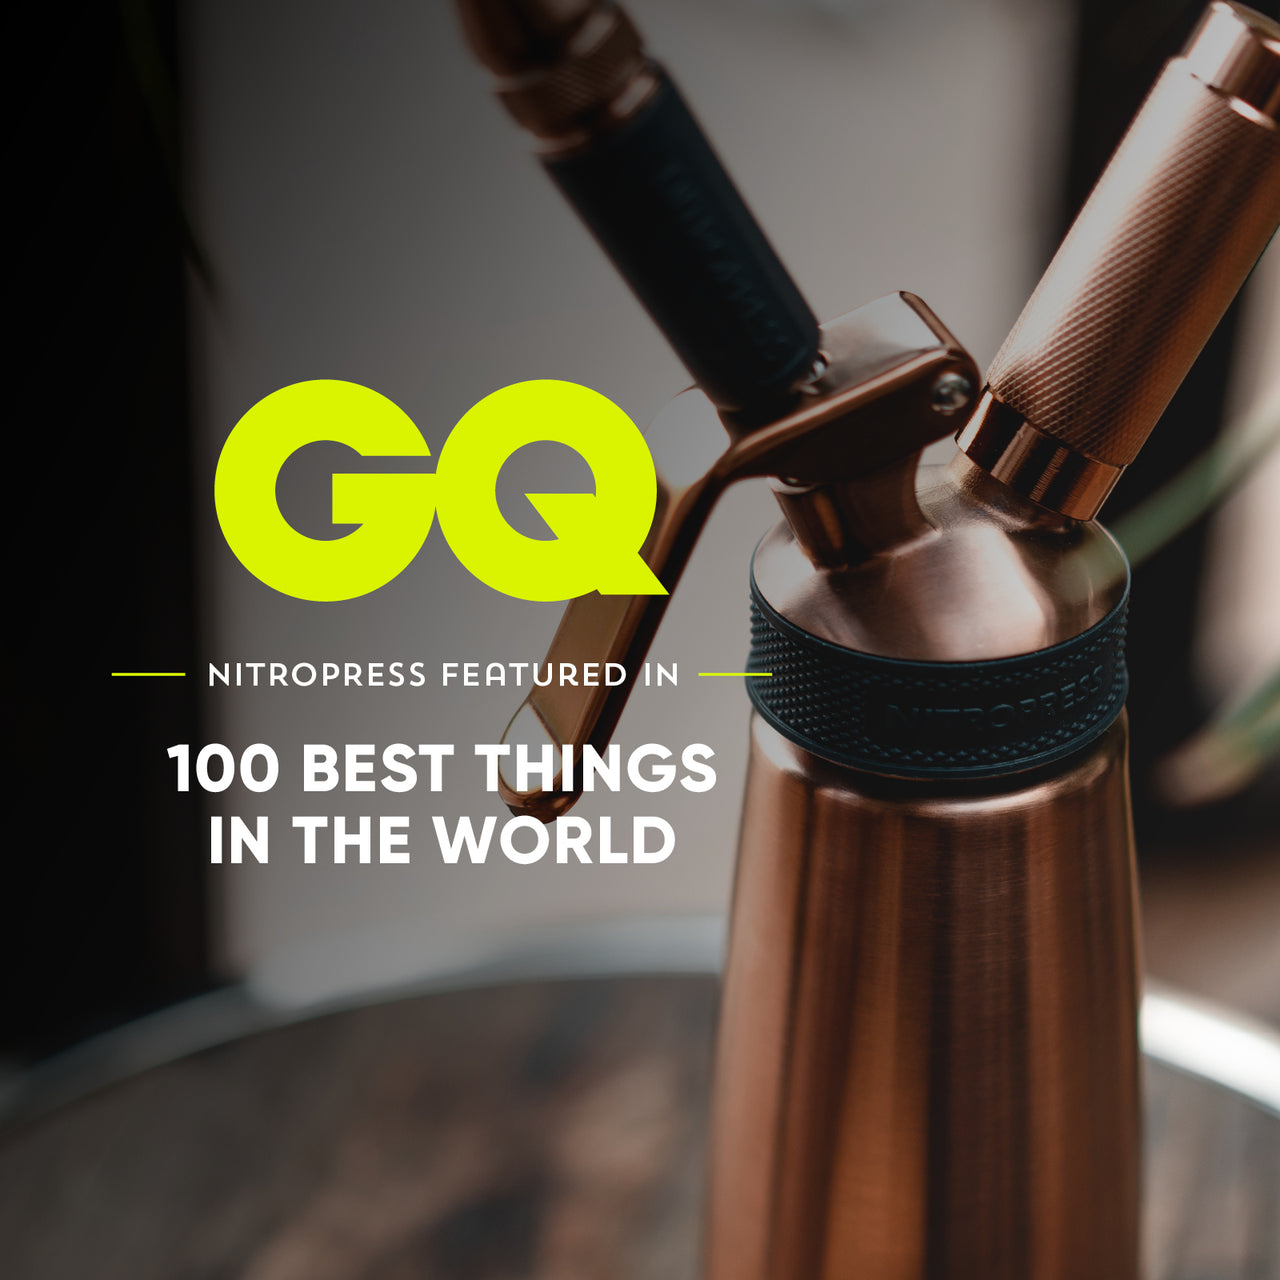 Copper edition GQ best things in the world 